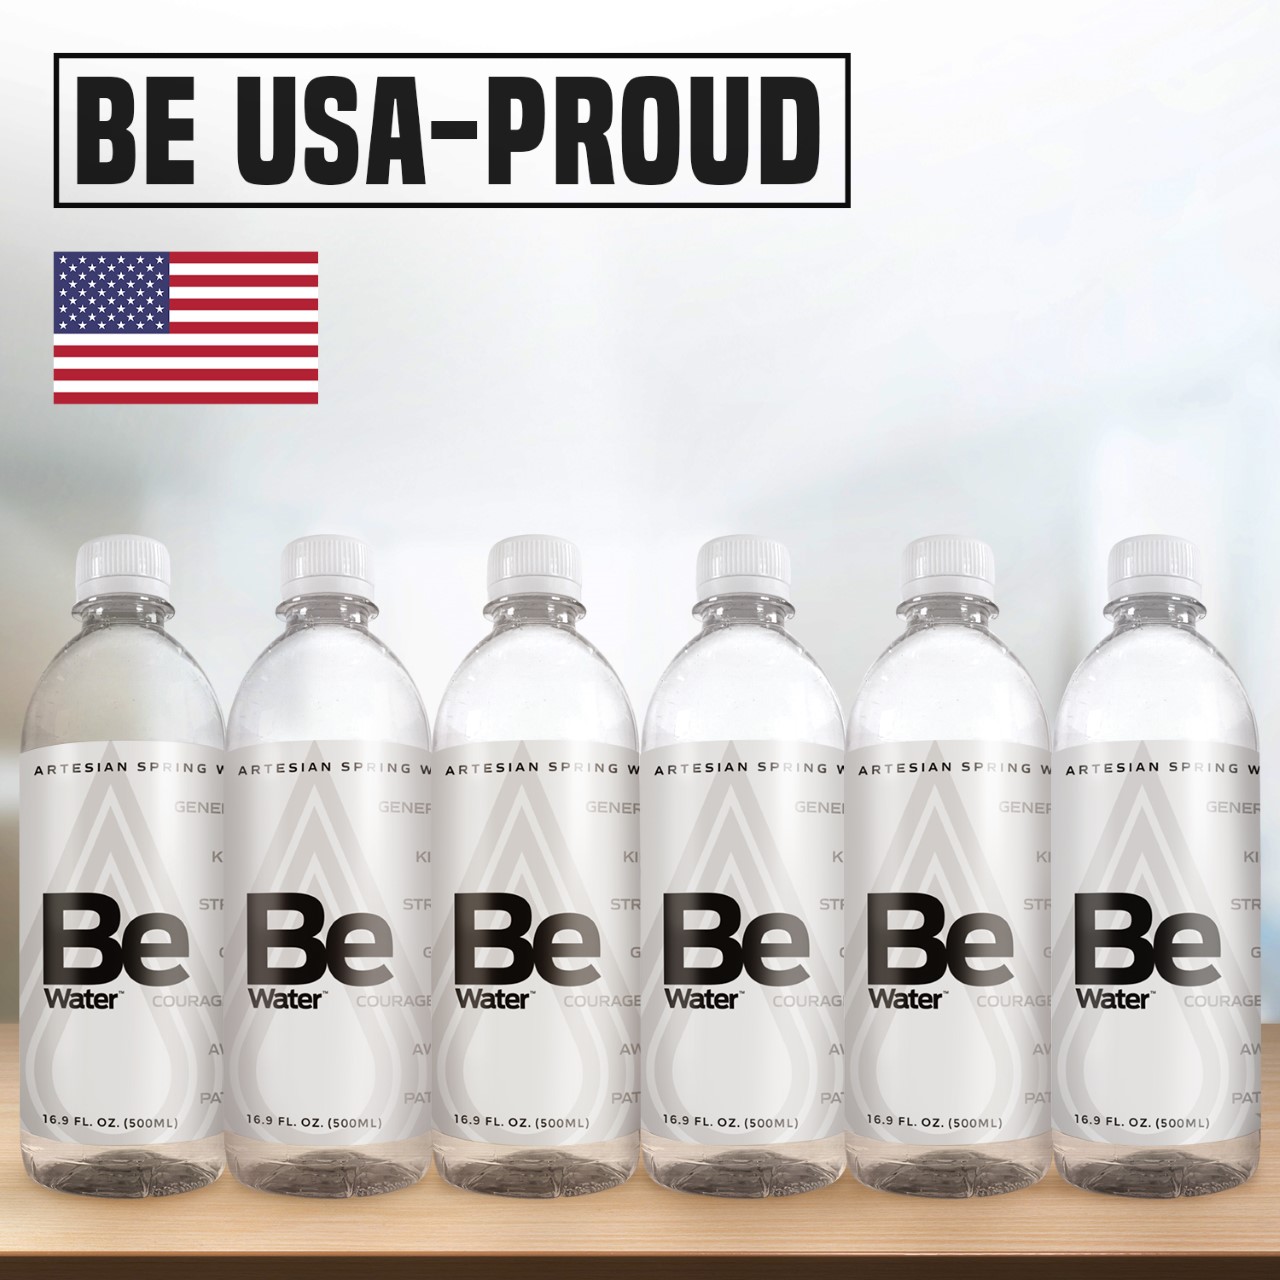 Be Water - BE USA-PROUD